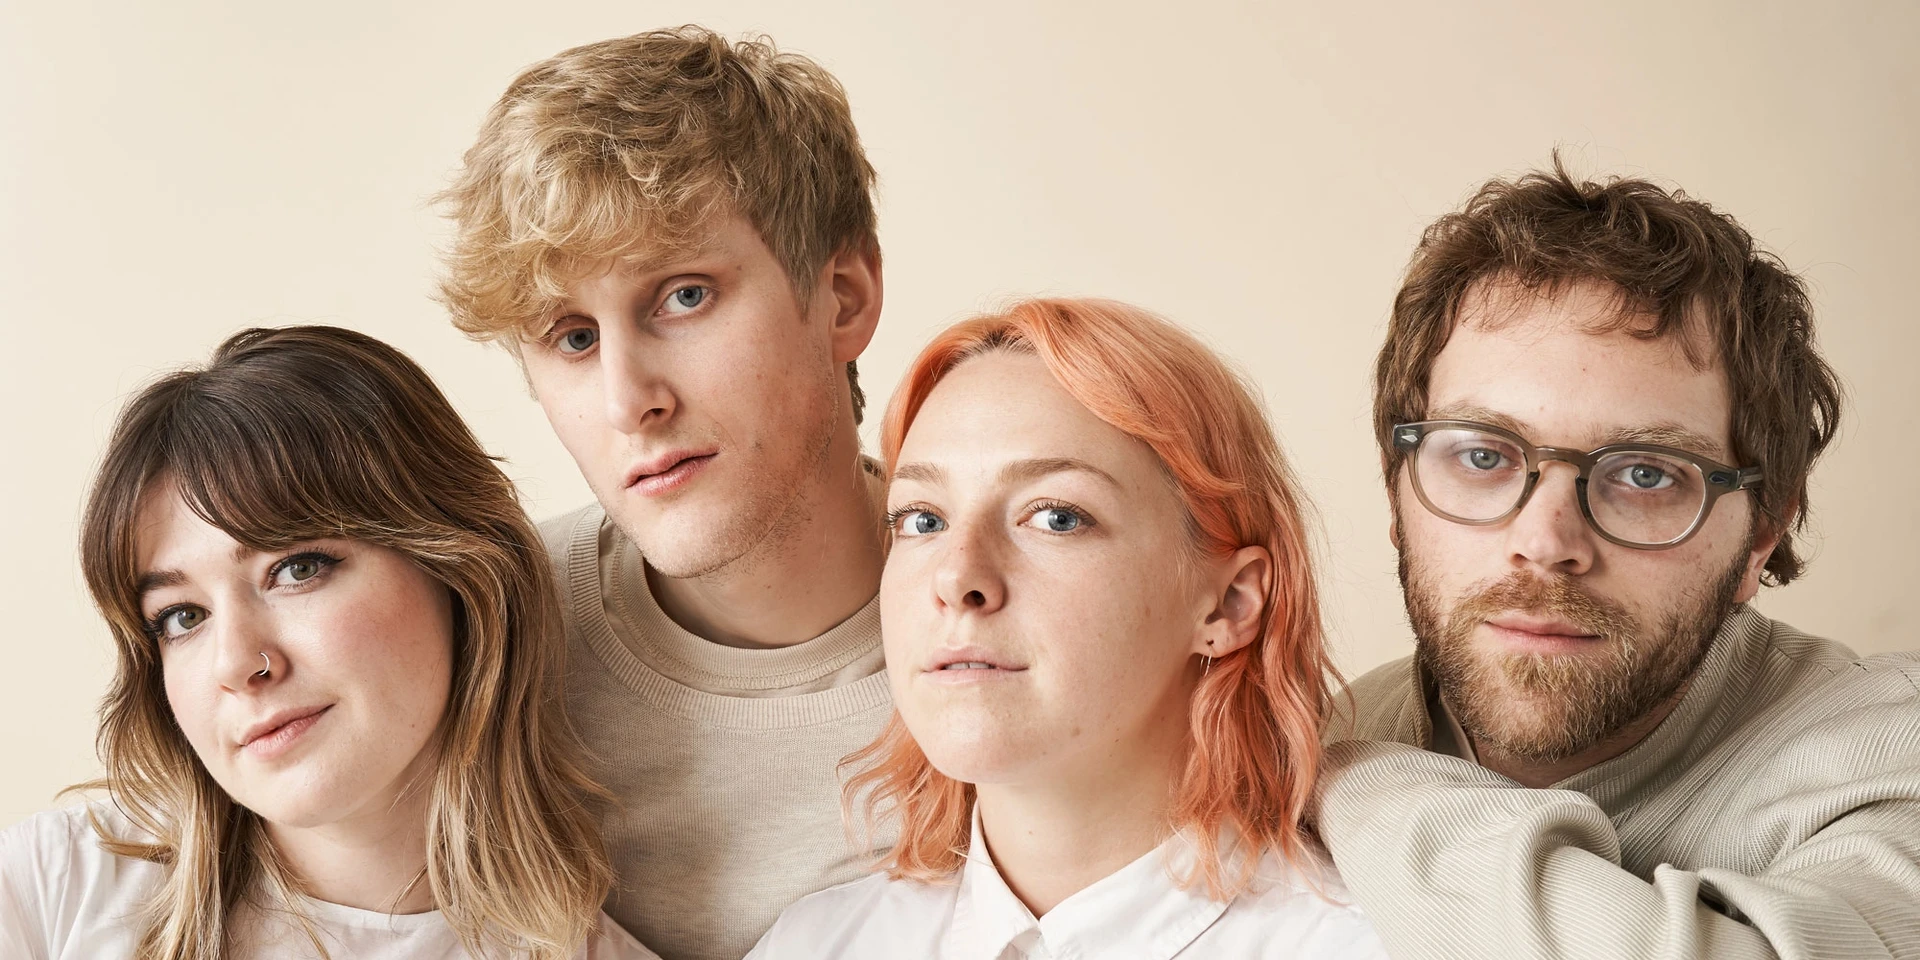 Yumi Zouma to perform in Tokyo and Seoul this September